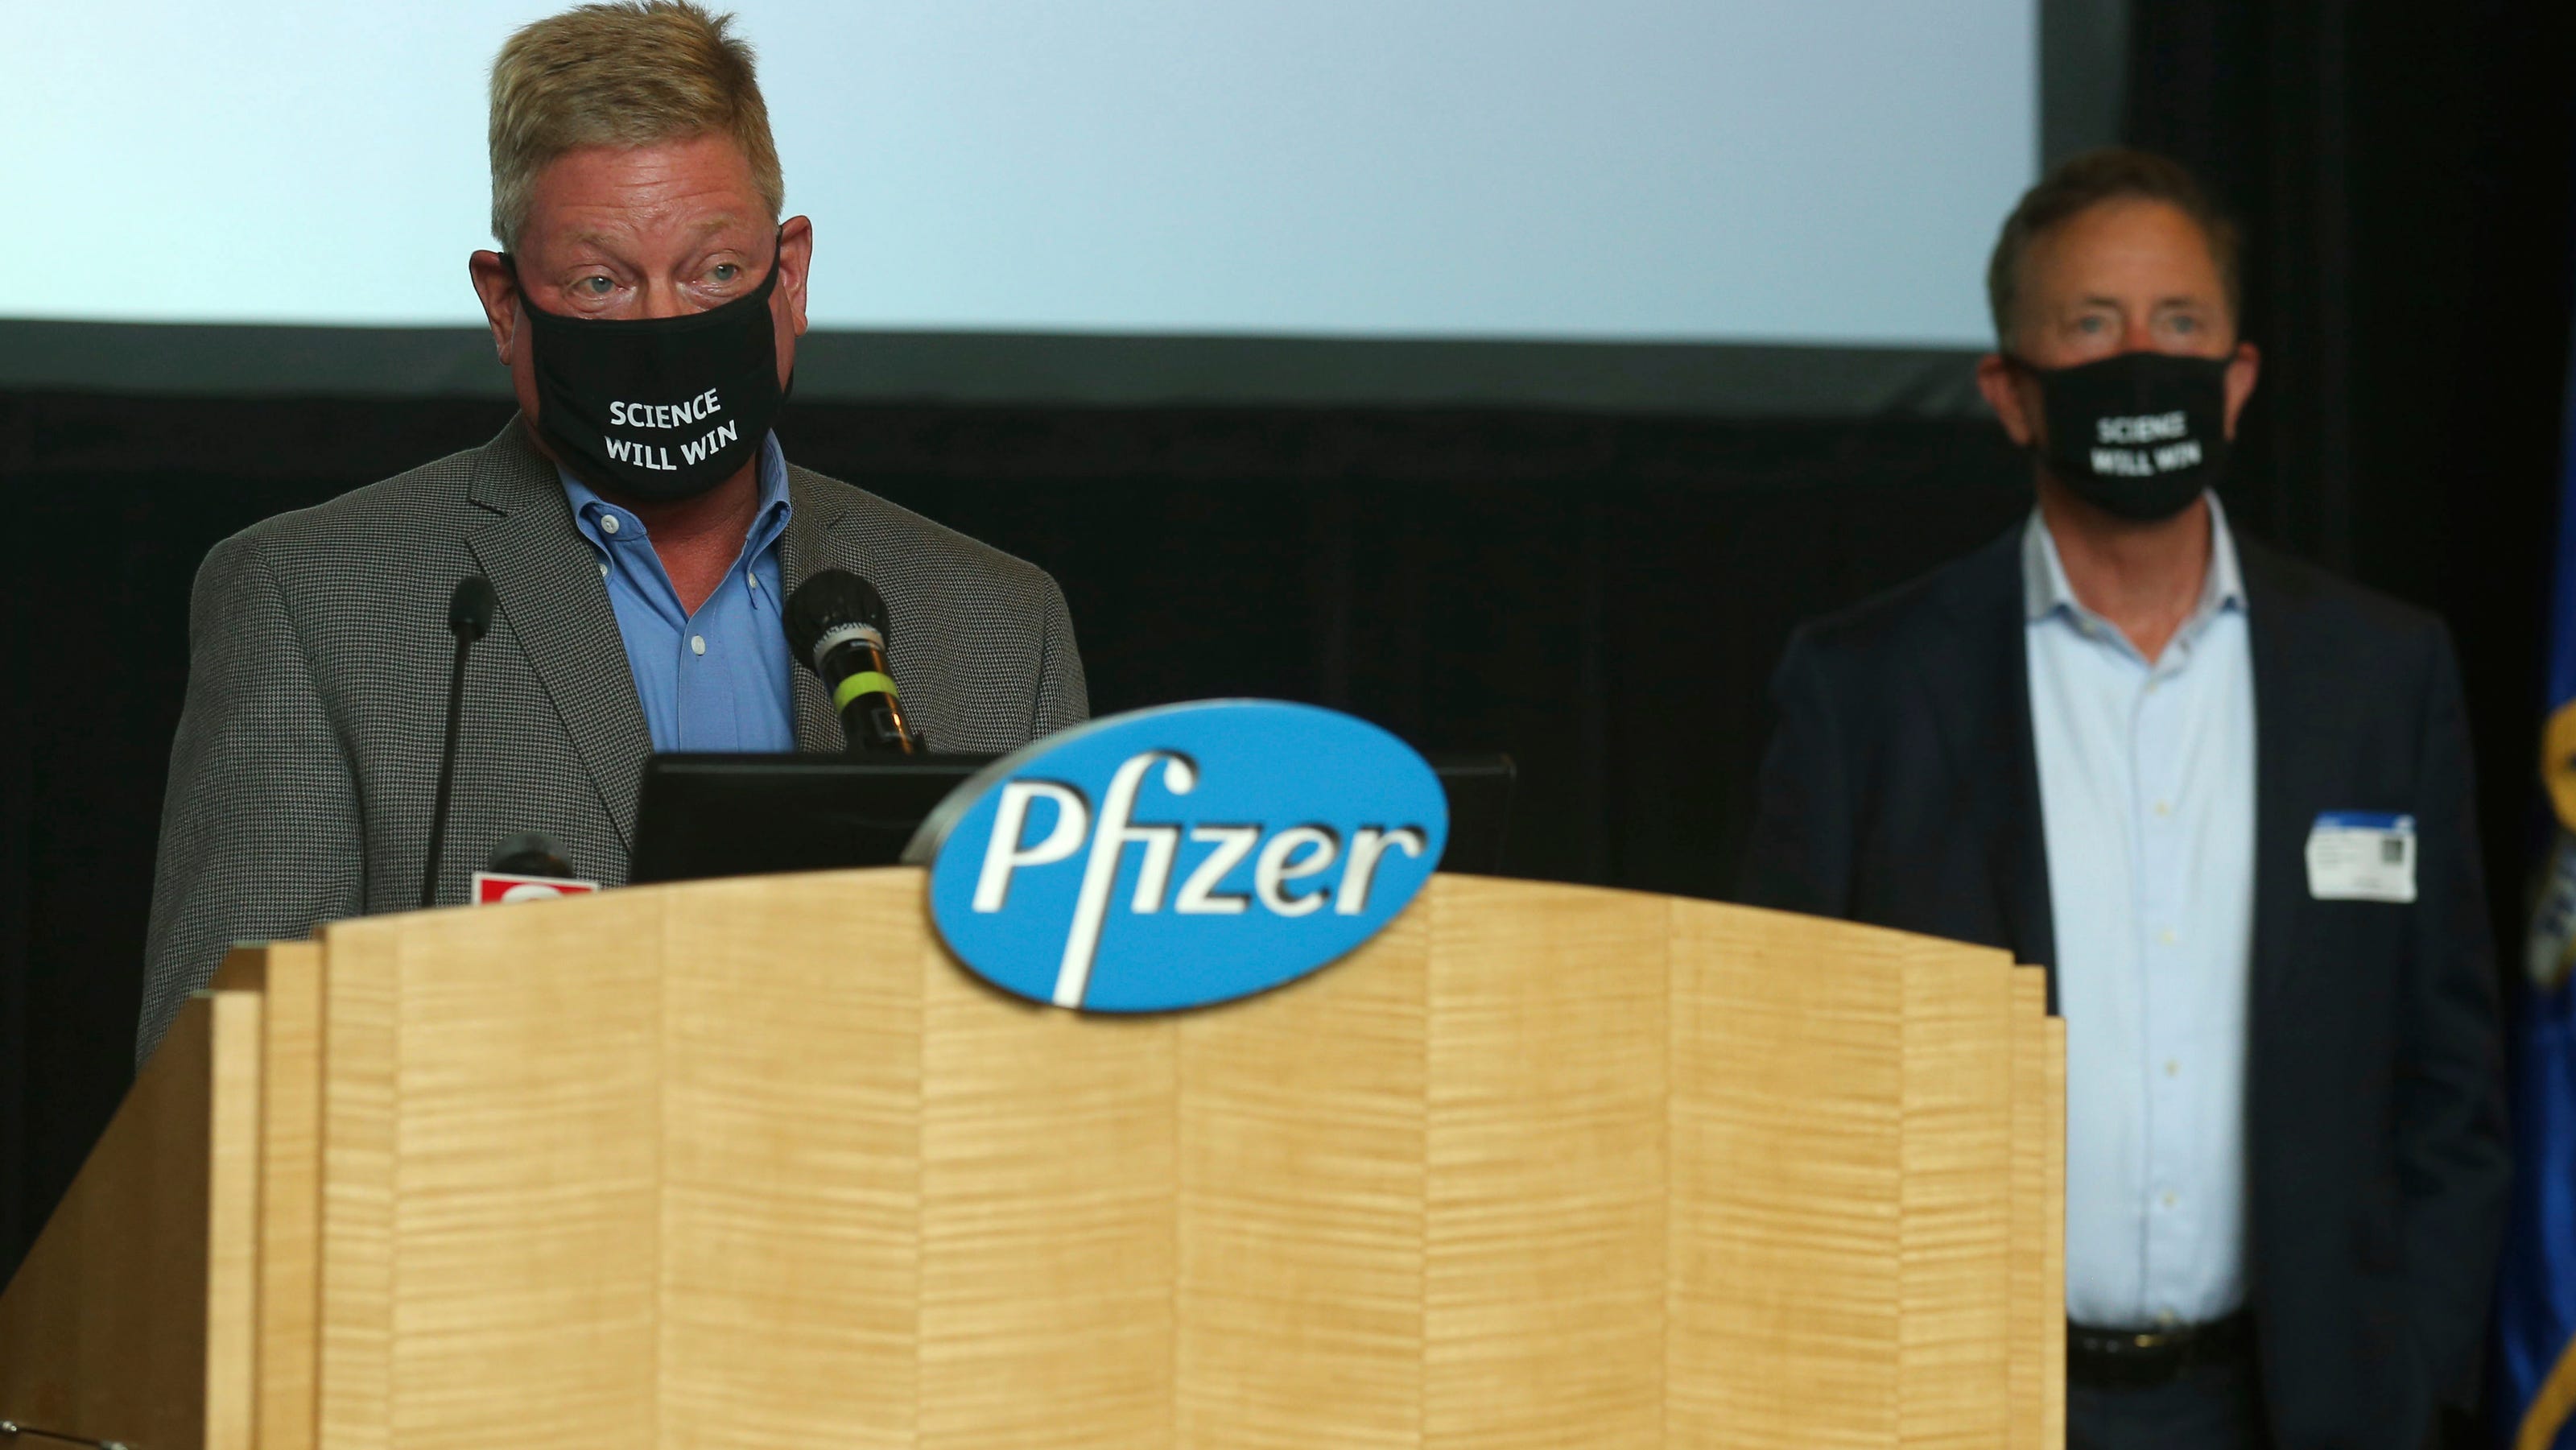 US pays 1.95 billion for 100 million doses of Pfizer COVID19 vaccine